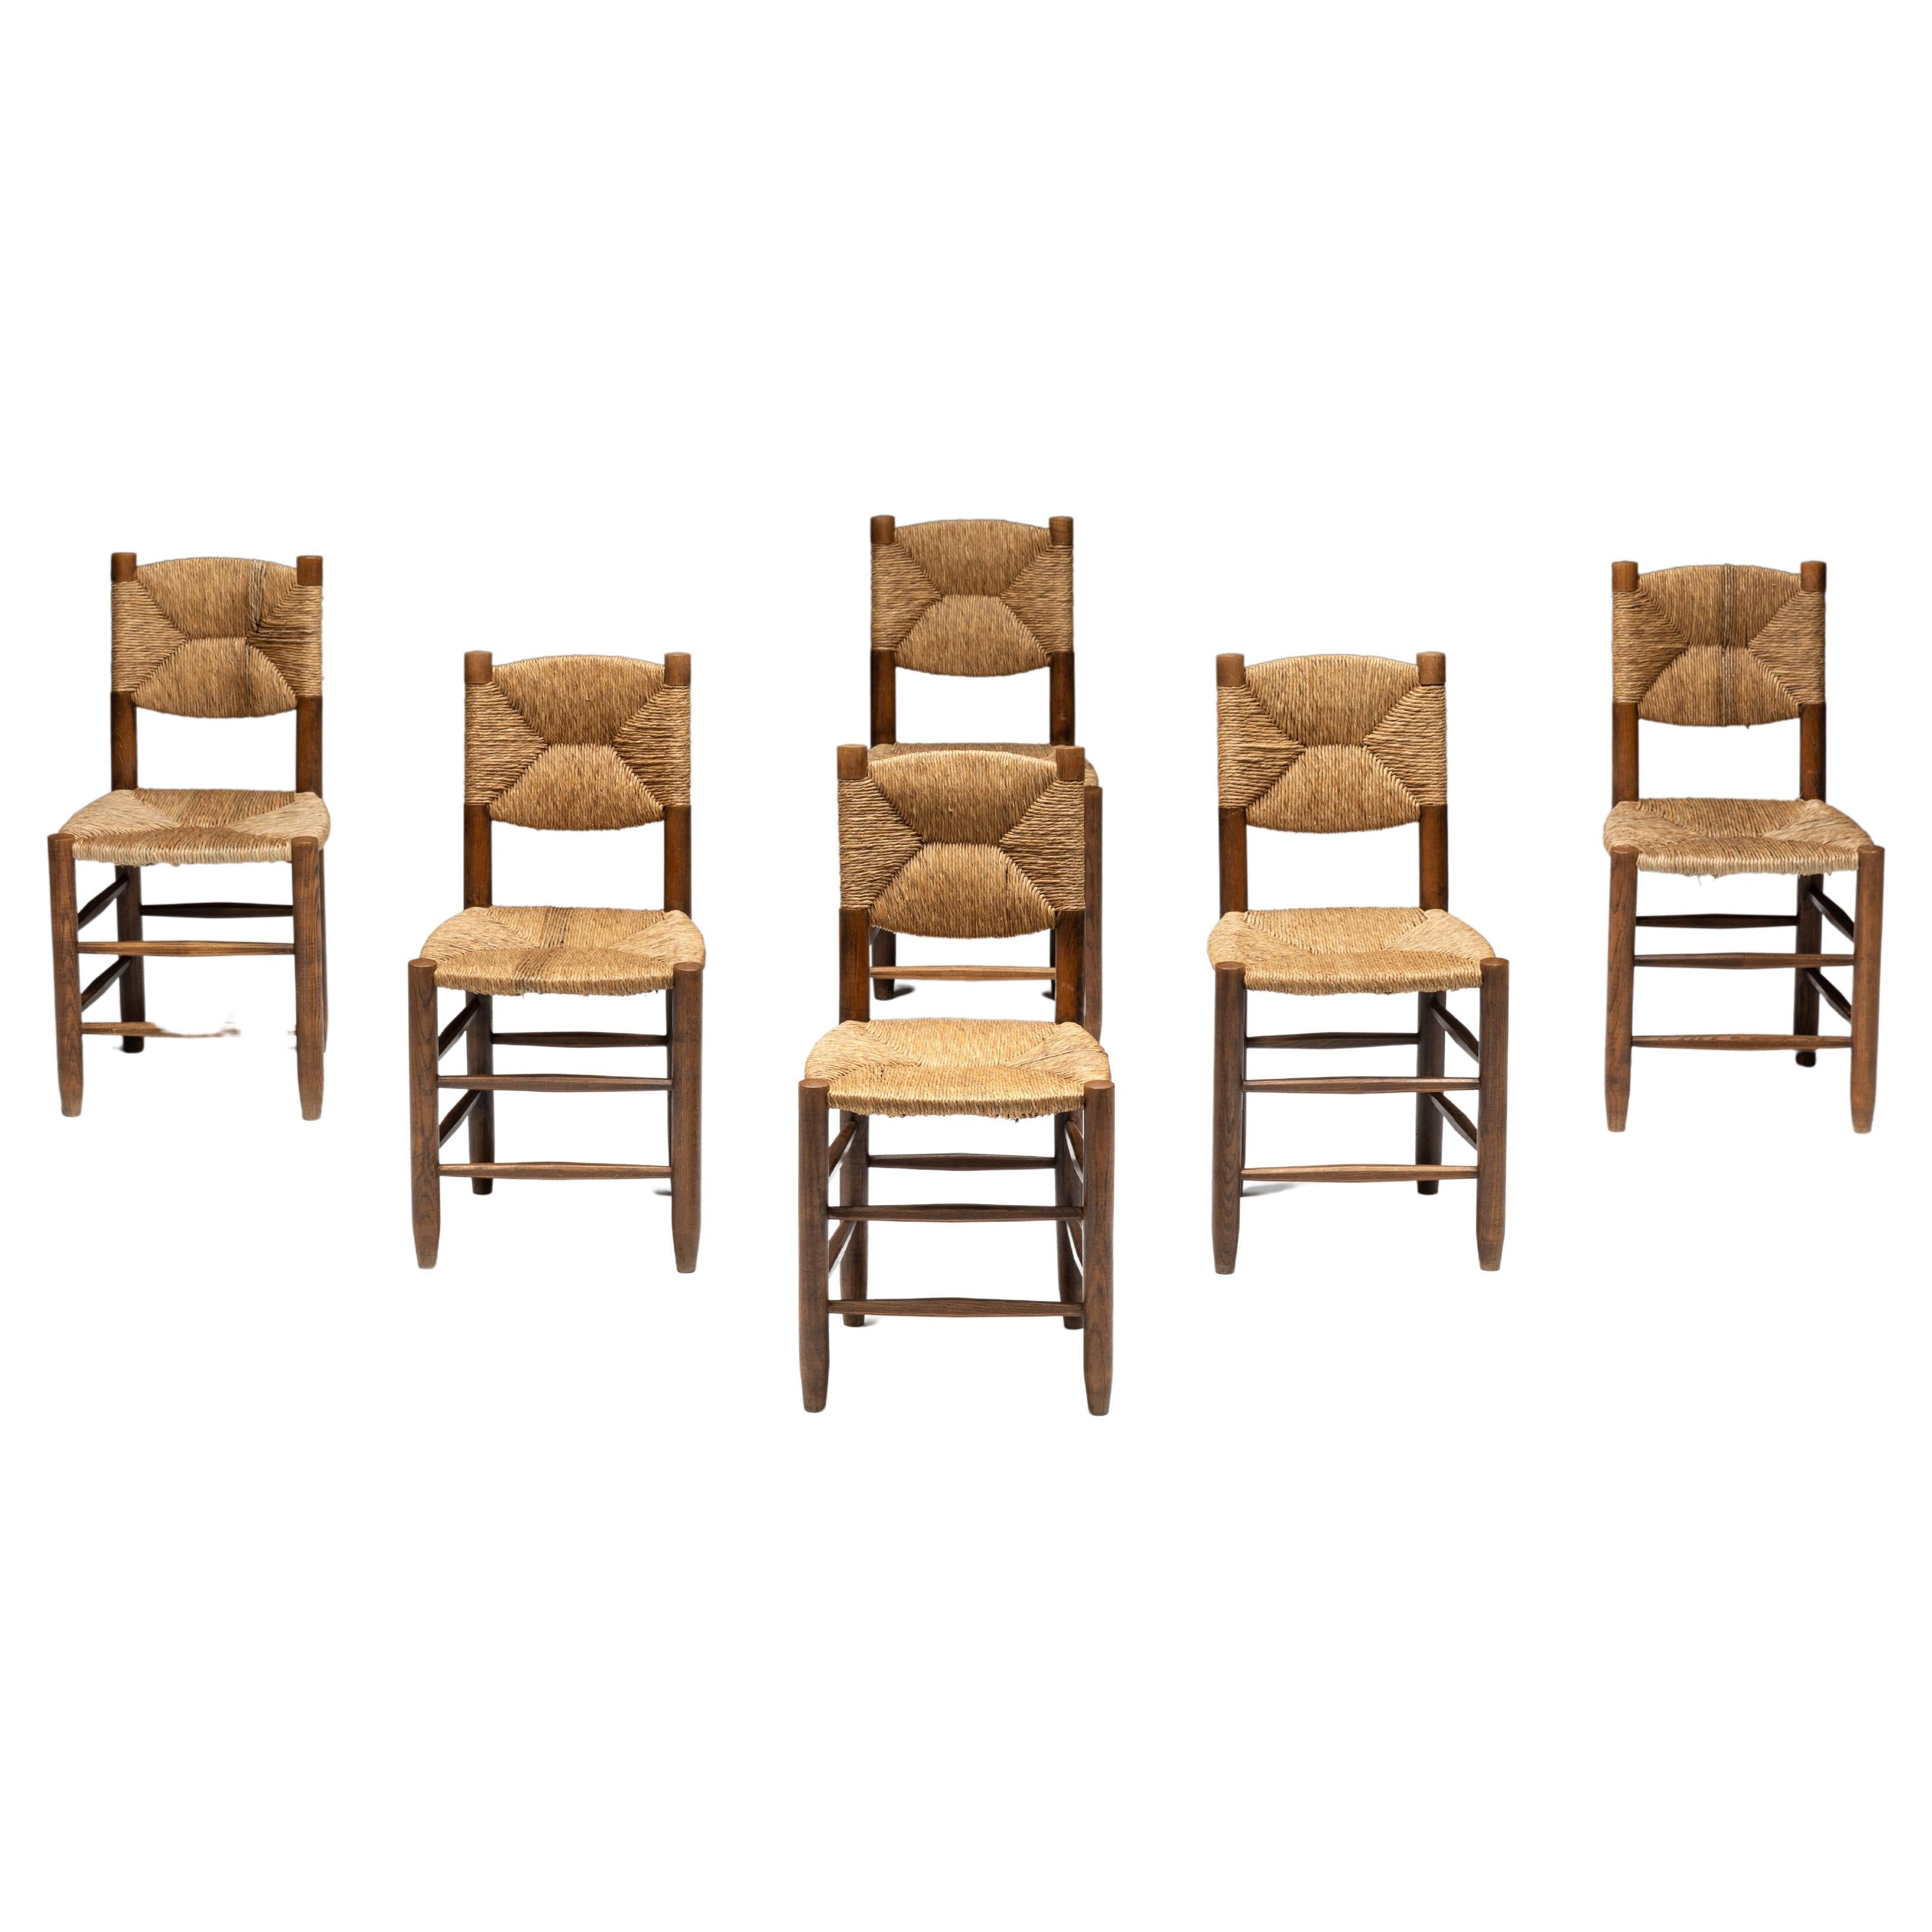 "Bauche" Dining Chairs by Charlotte Perriand for Steph Simon, France, 1950s For Sale